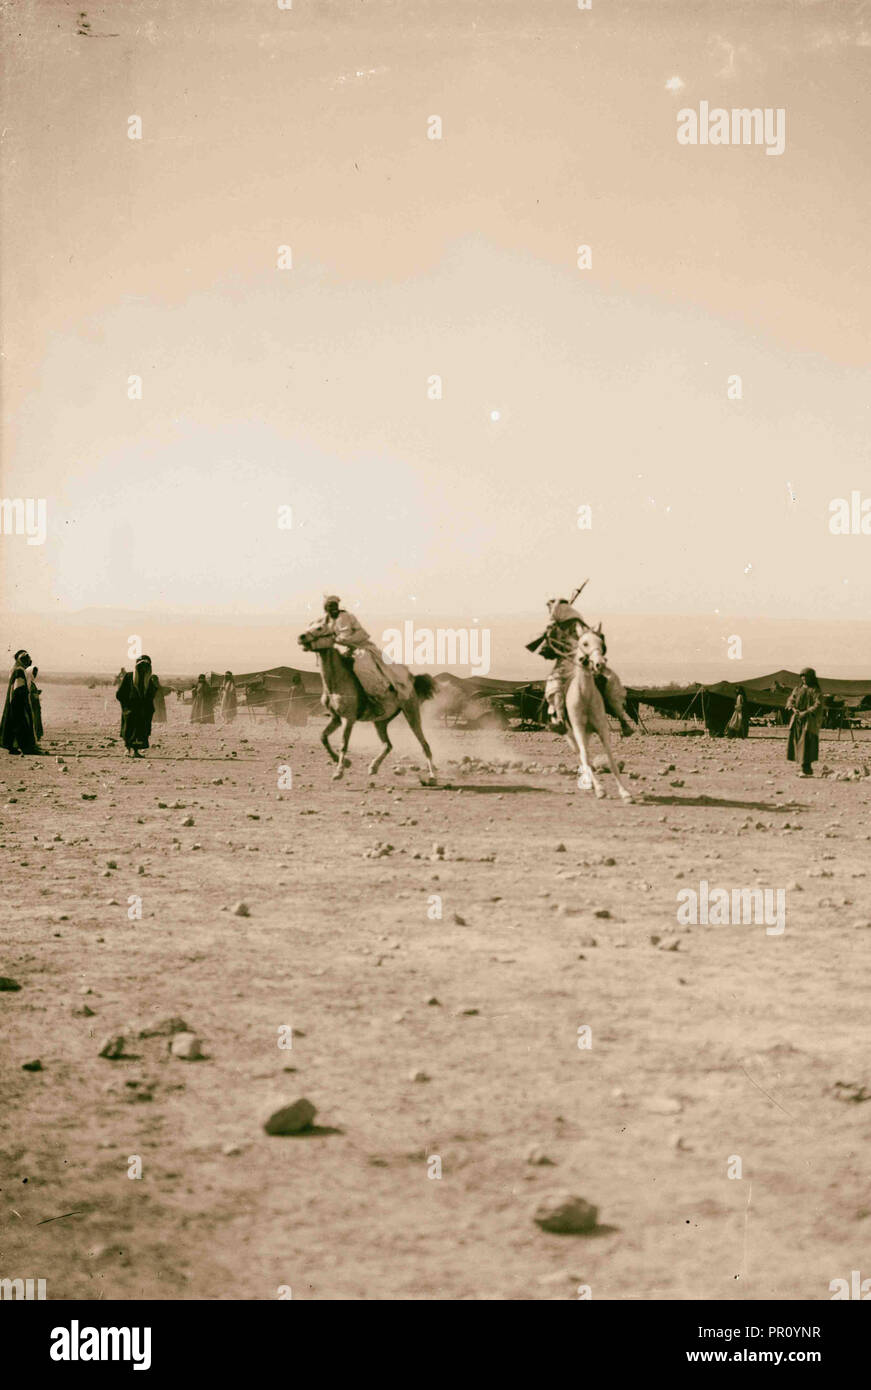 Bedouin wedding Mounted Bedouins chasing each other 1900, the Bedouin are a grouping of nomadic Arab peoples Stock Photo